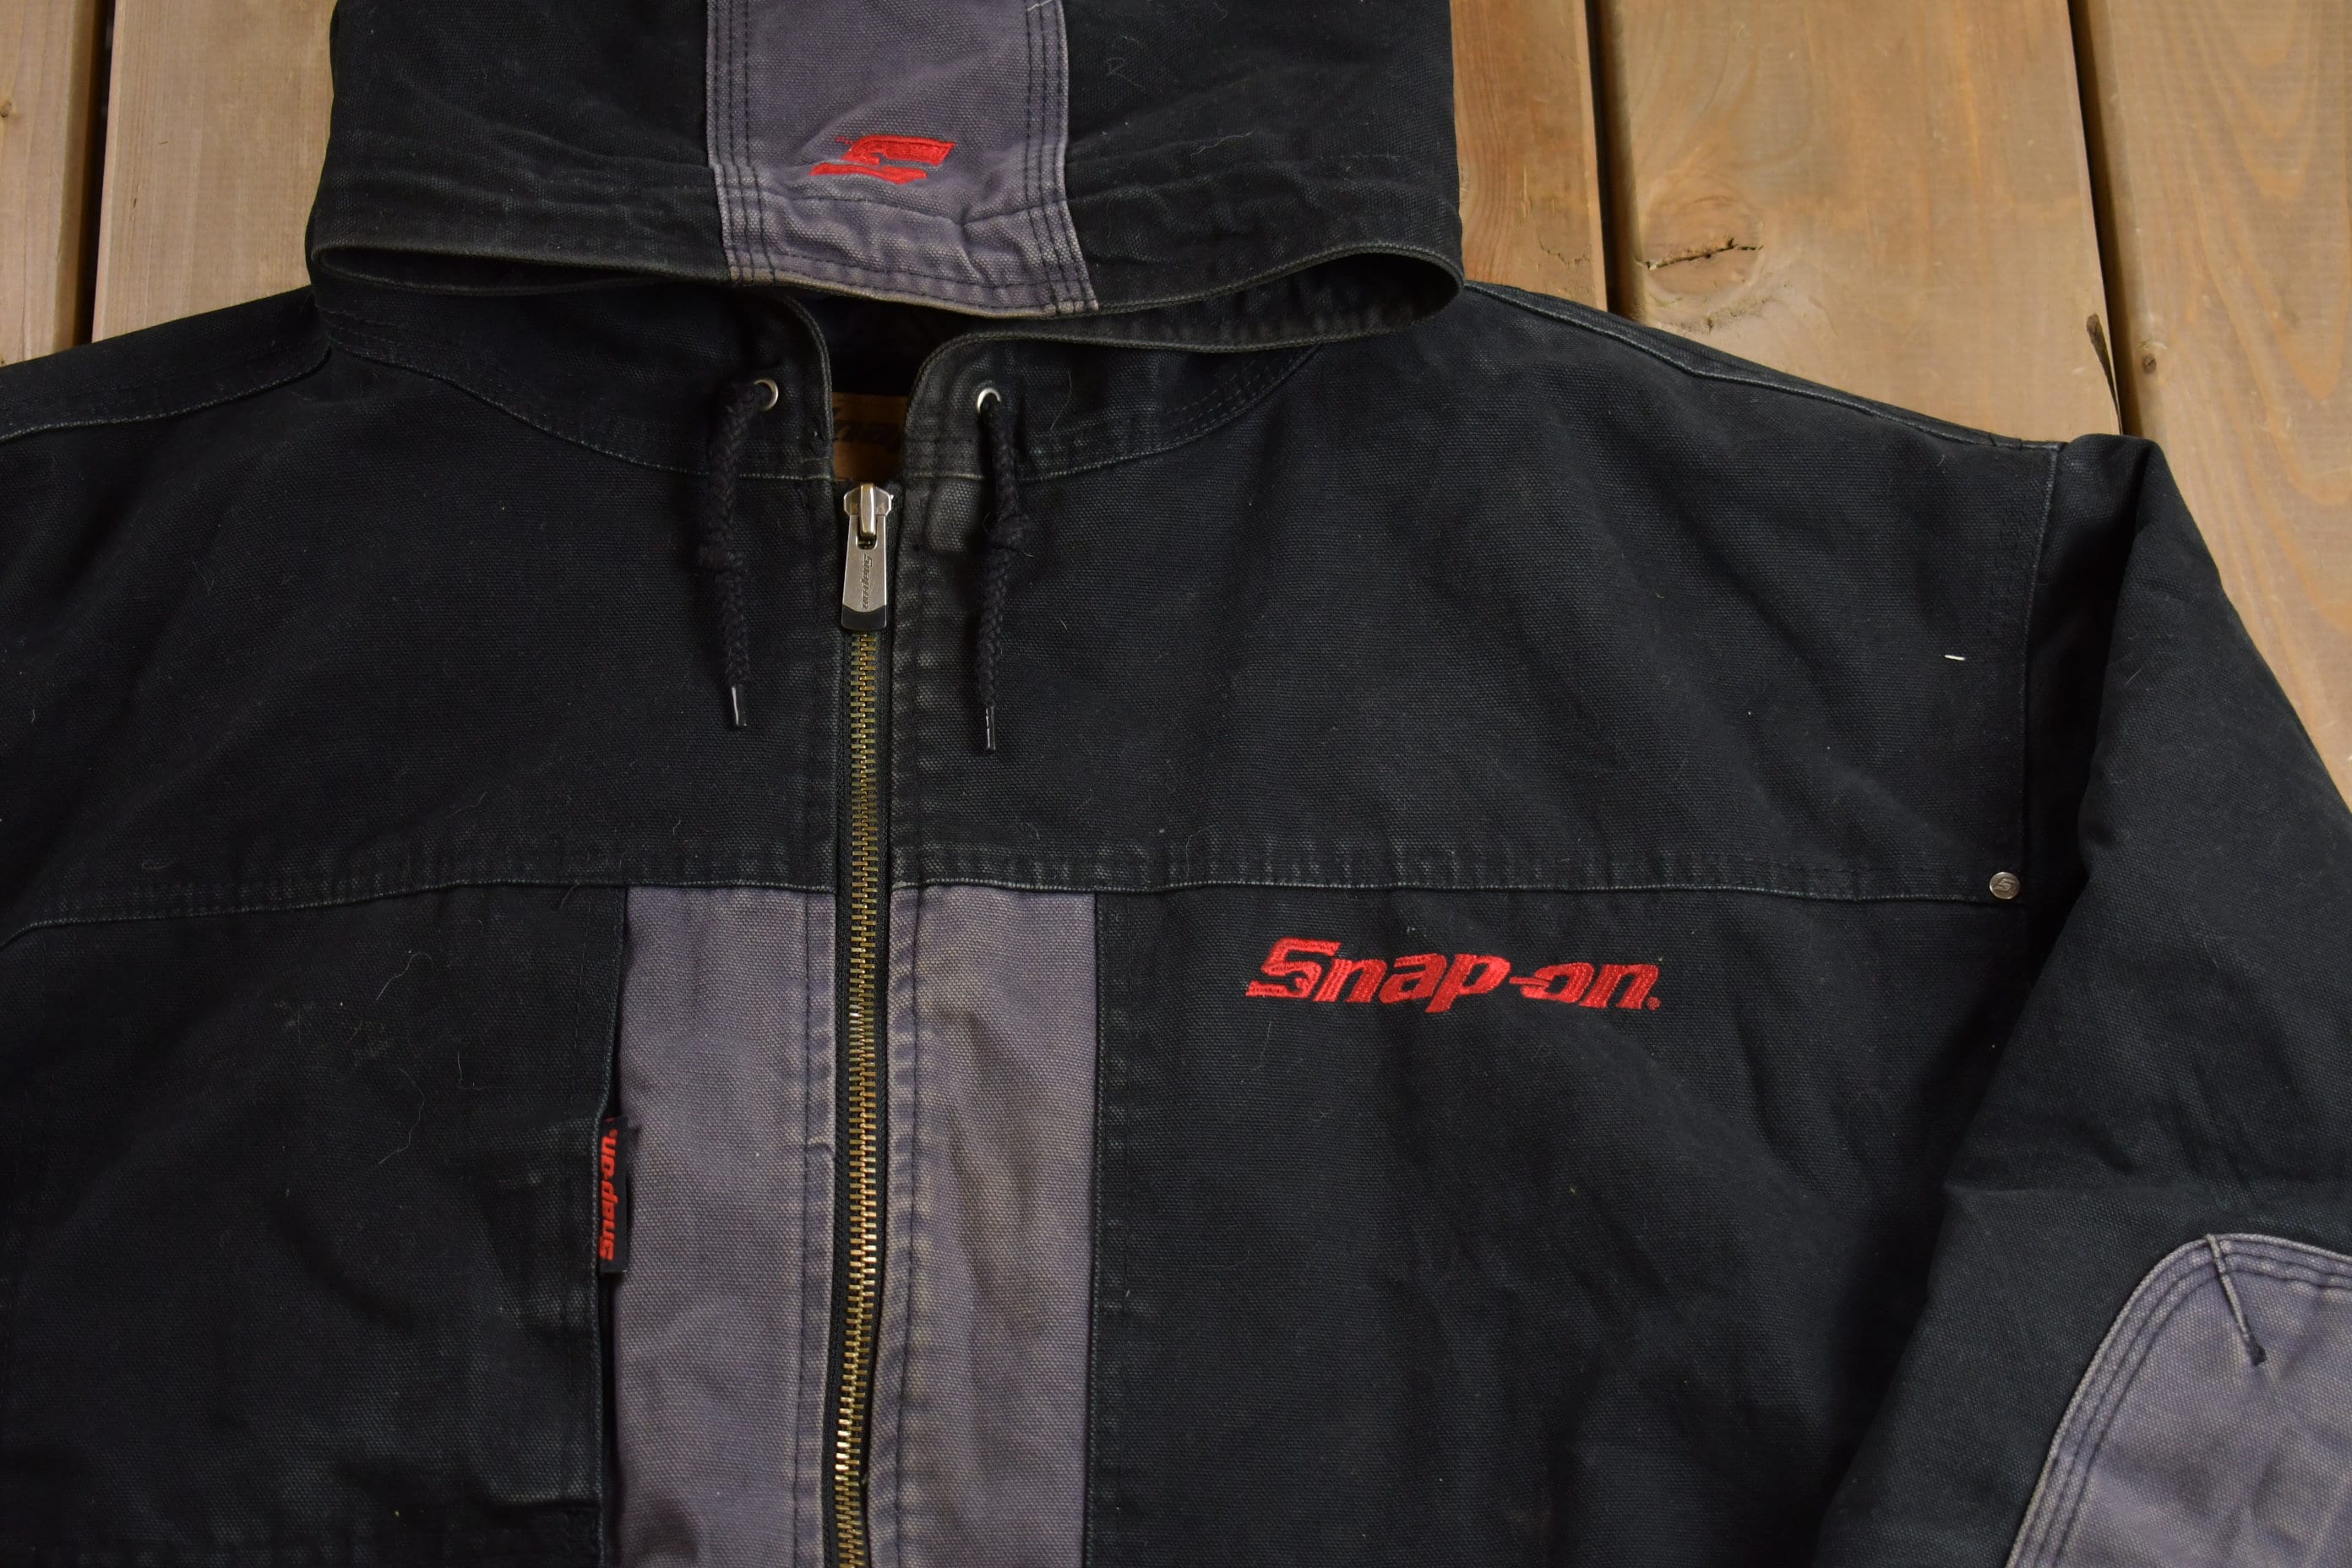 Vintage 1990s Snap on Workwear Jacket / Snap-on / Spell Out